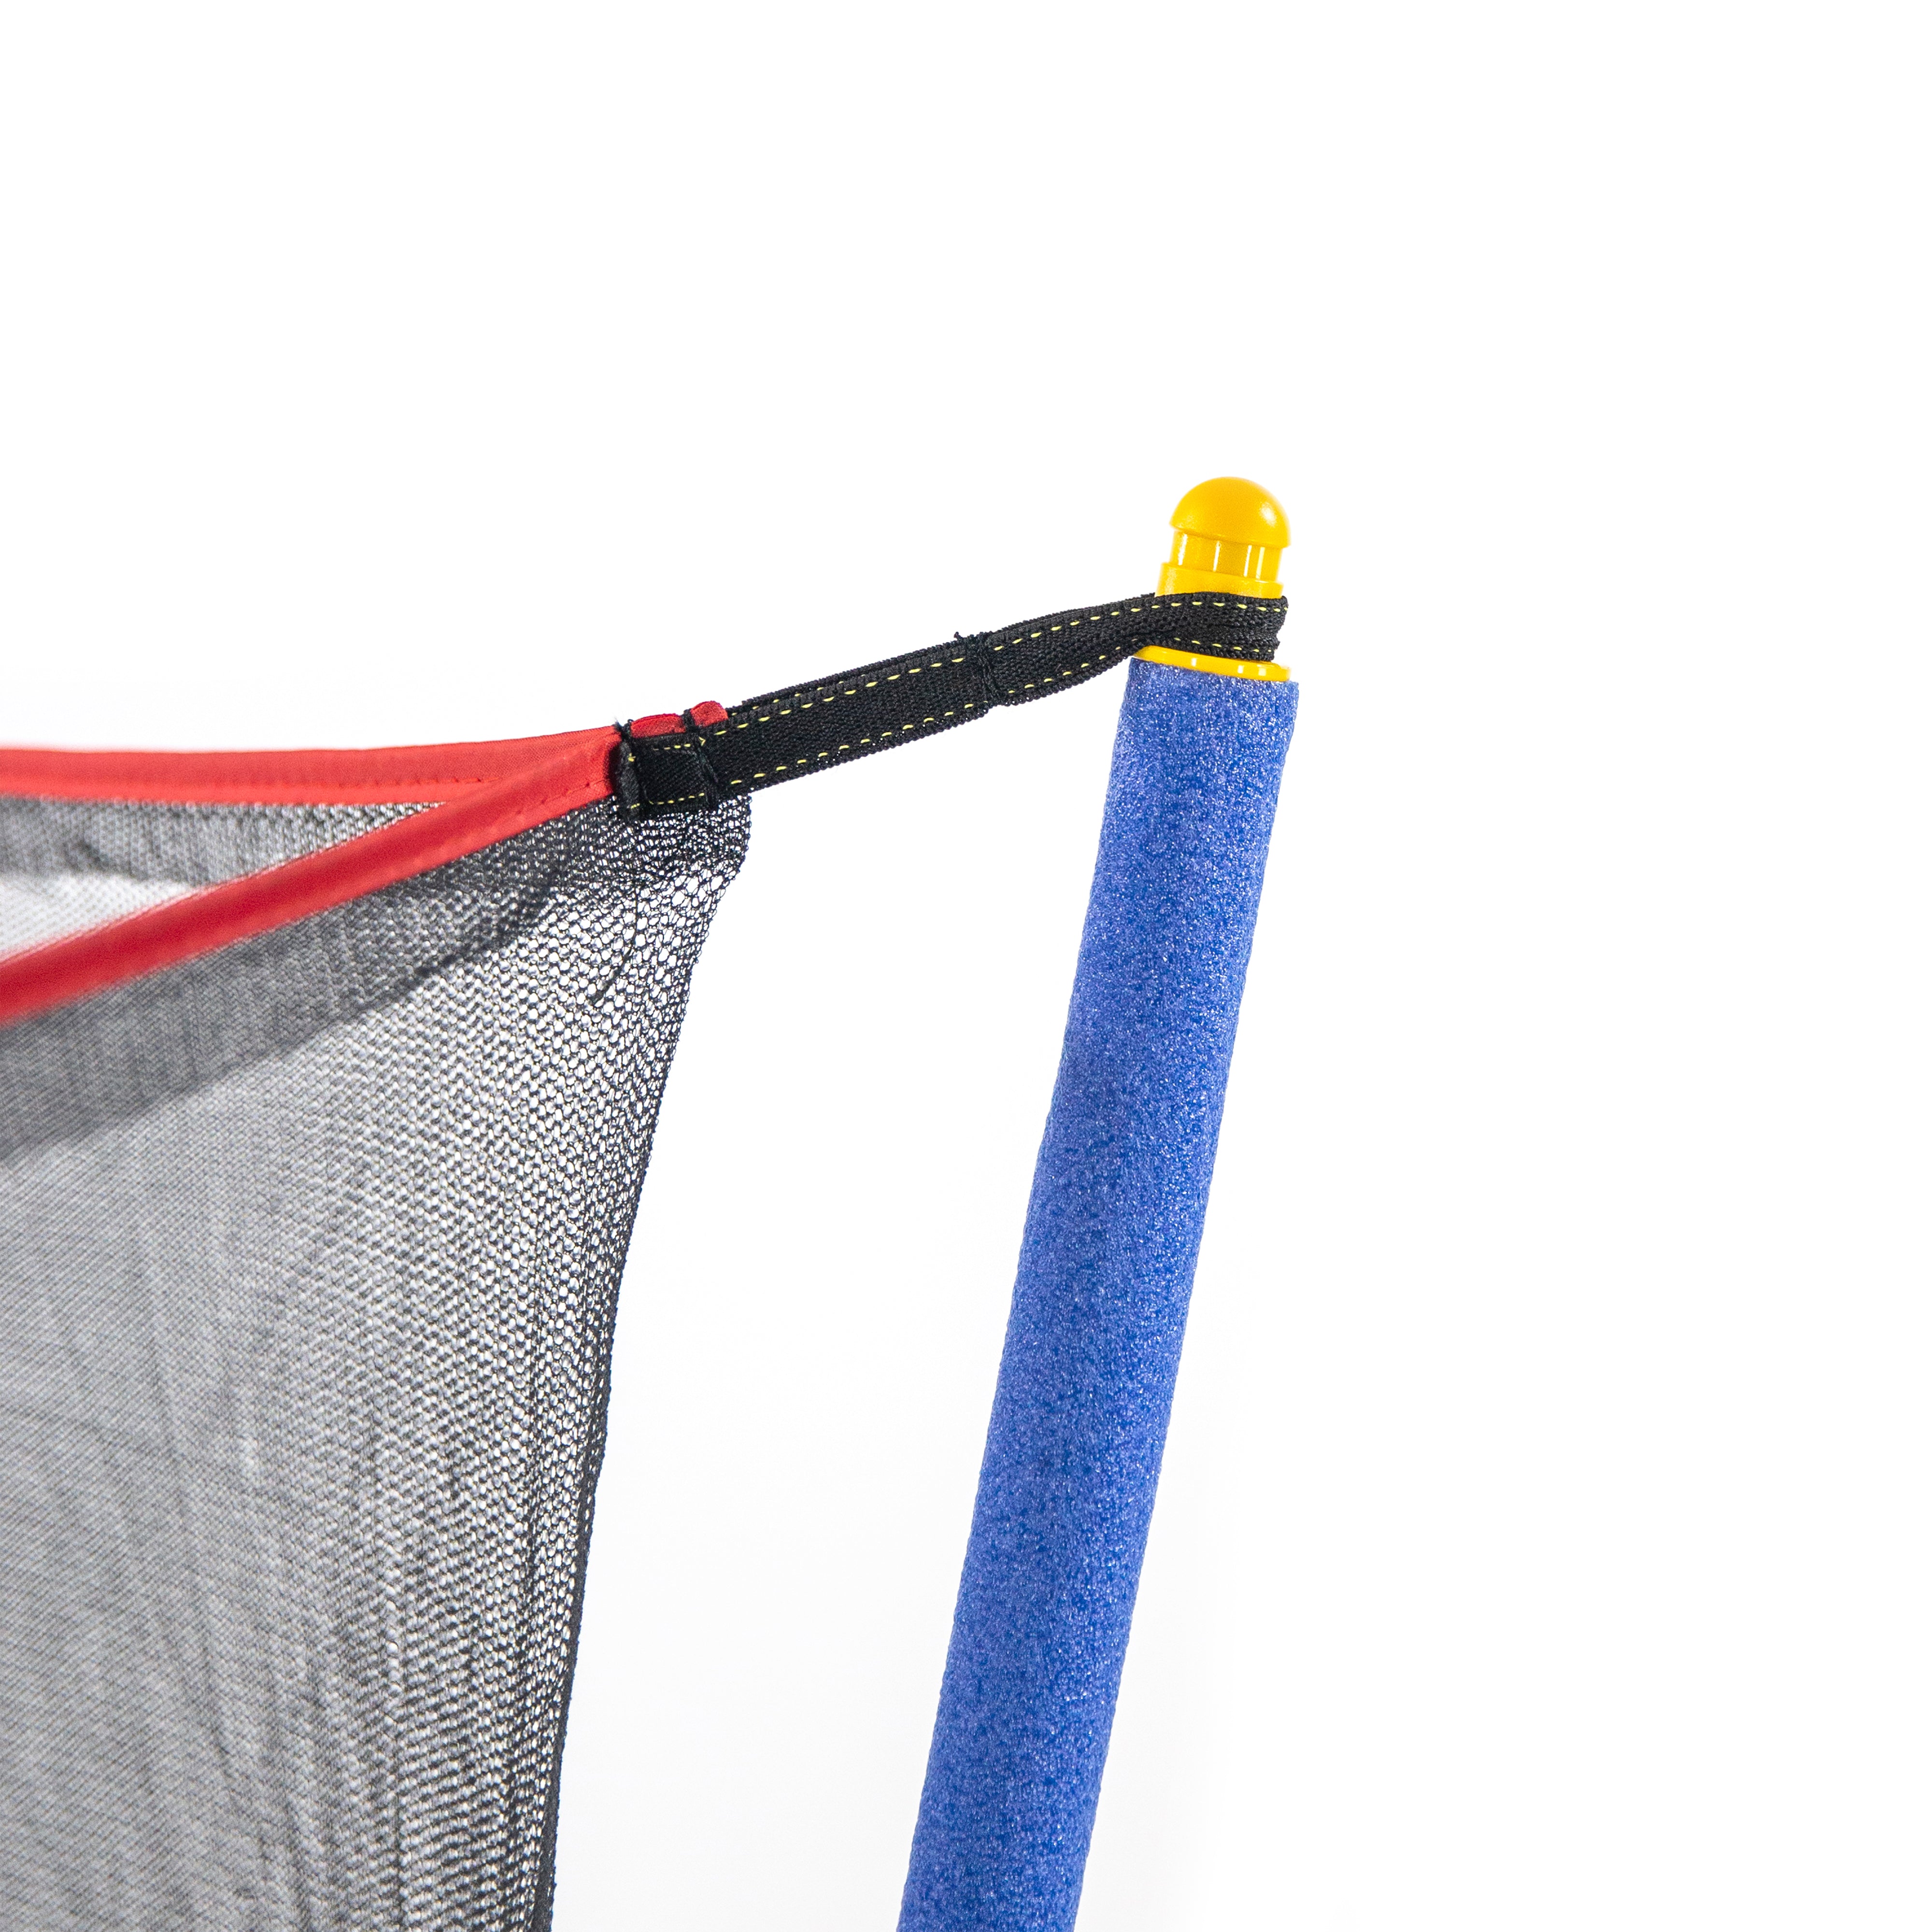 The black enclosure net with red trimming is attached to the yellow pole cap that sits on the blue enclosure pole. 